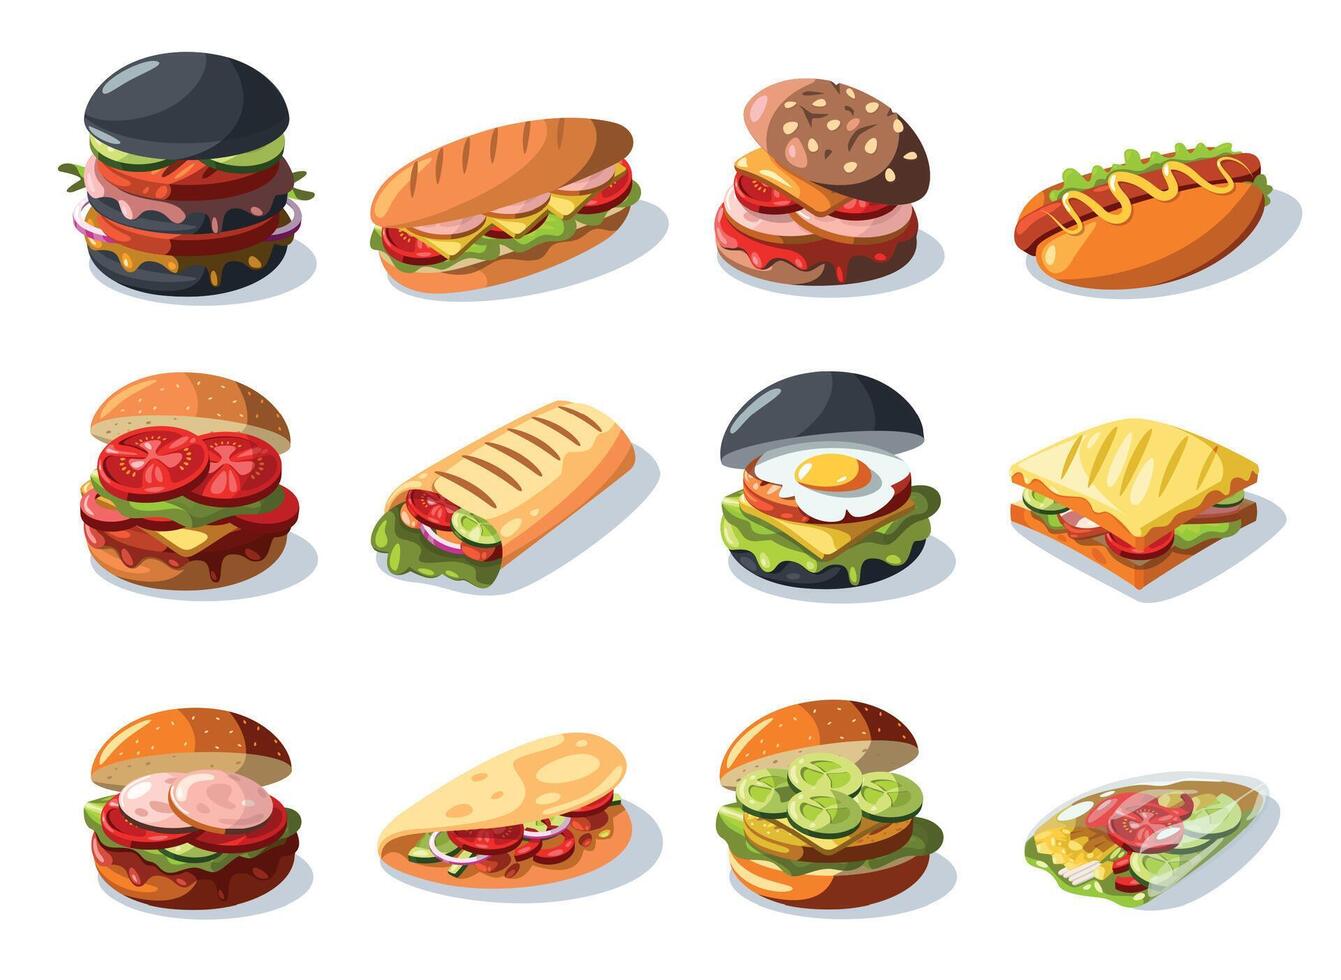 Cartoon sandwiches. Fresh fast food with different fillings, healthy food for snack and lunch. Fastfood icons with cheese tomato and lettuce Vector set